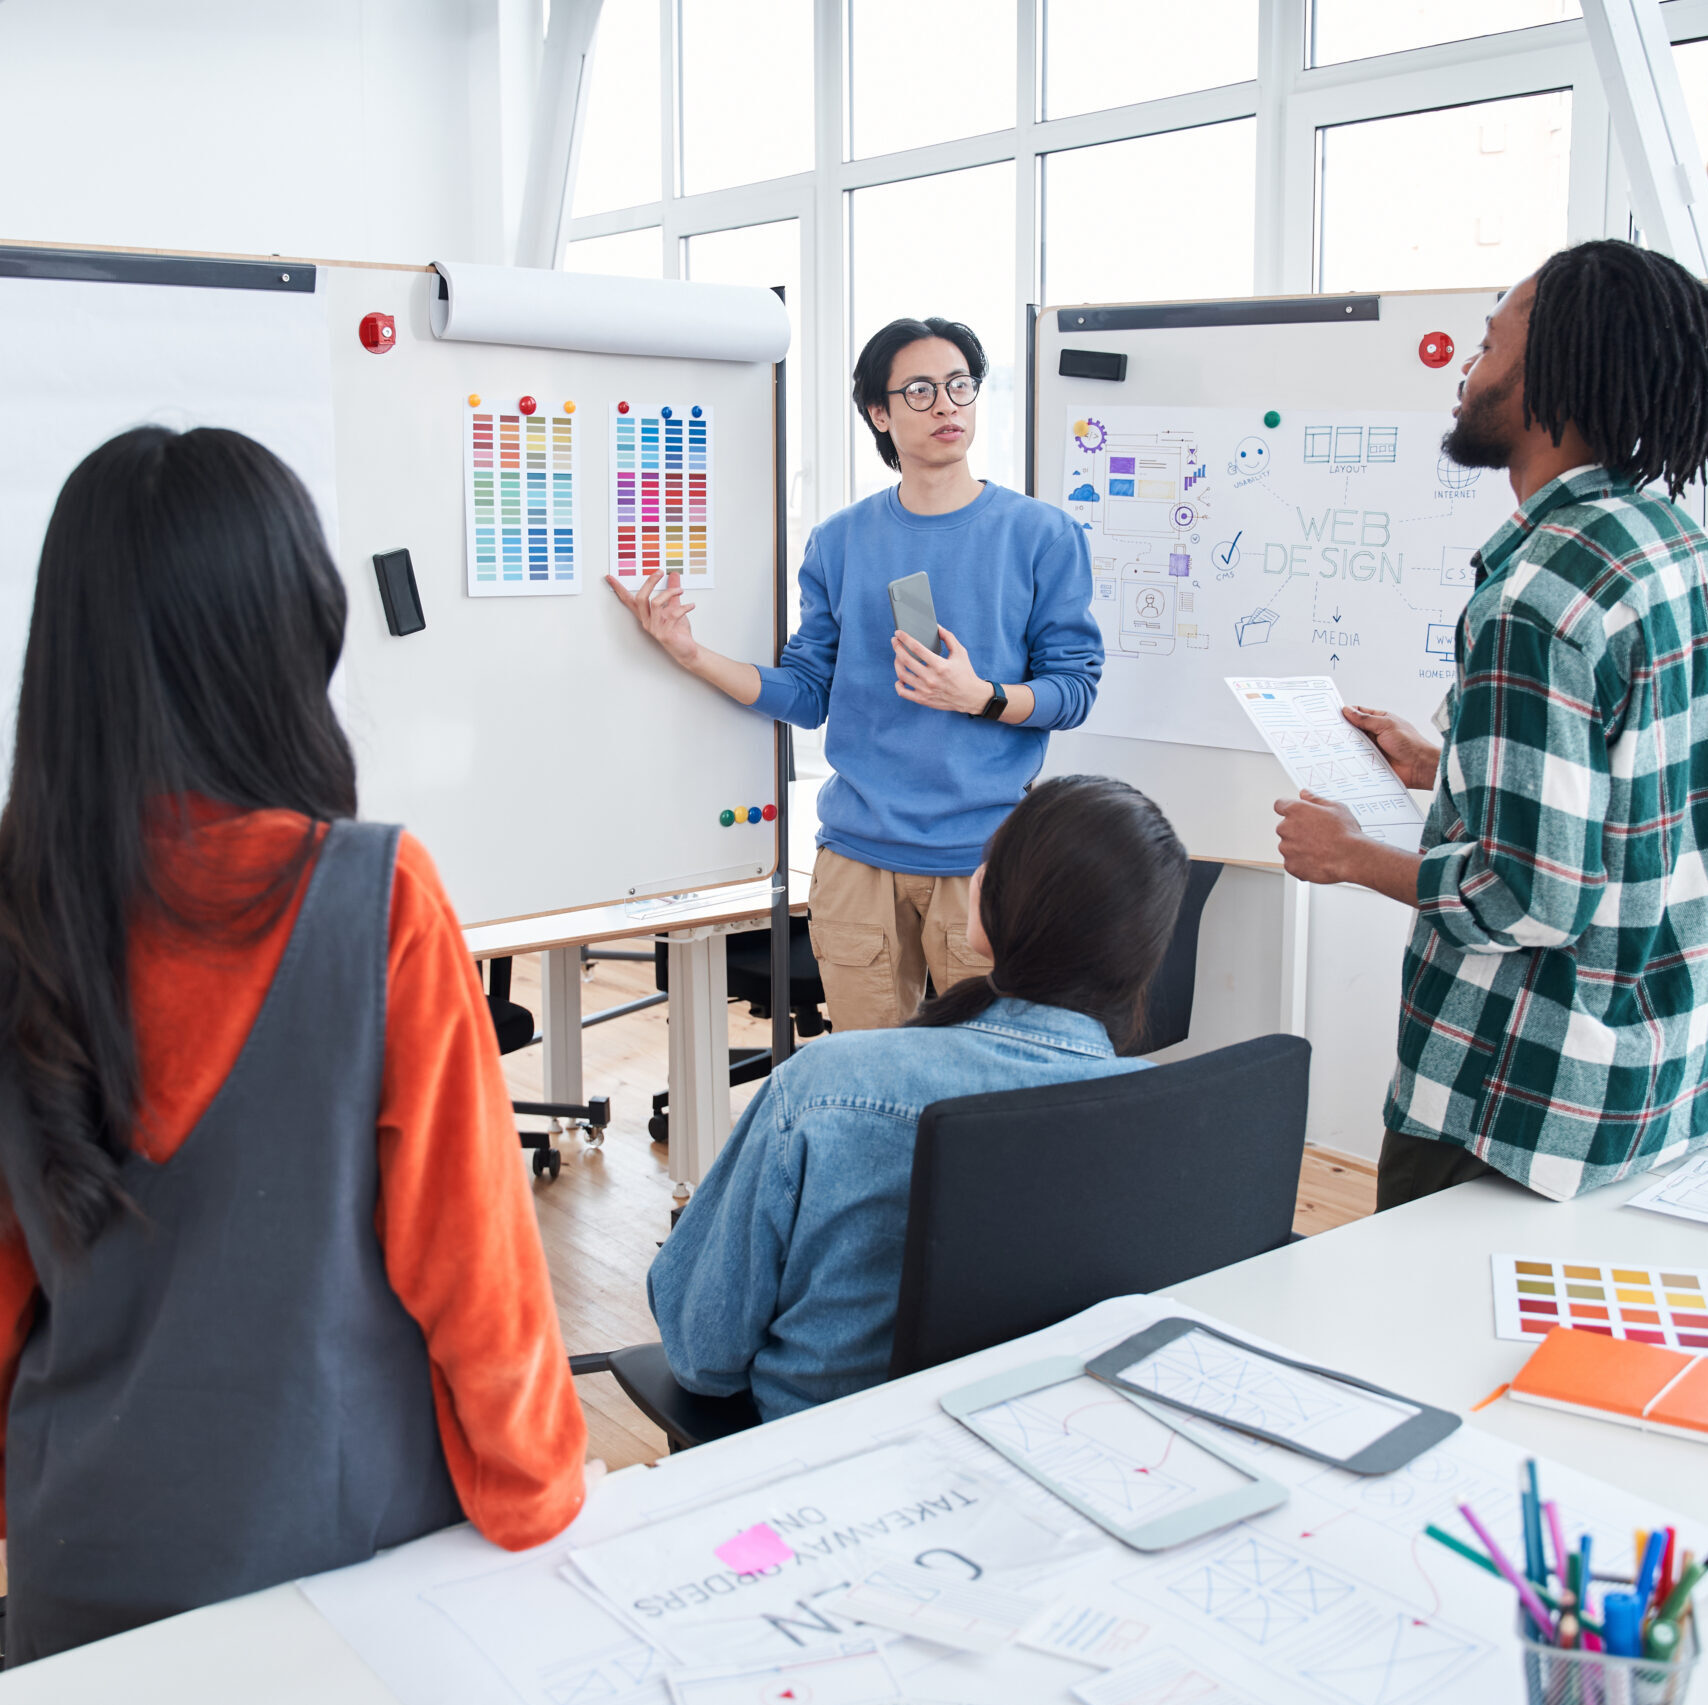 Students standing at the classroom and discussing project on interactive whiteboard. Handsome multiracial man wearing glasses pointing at the different colors while consulting with his classmates